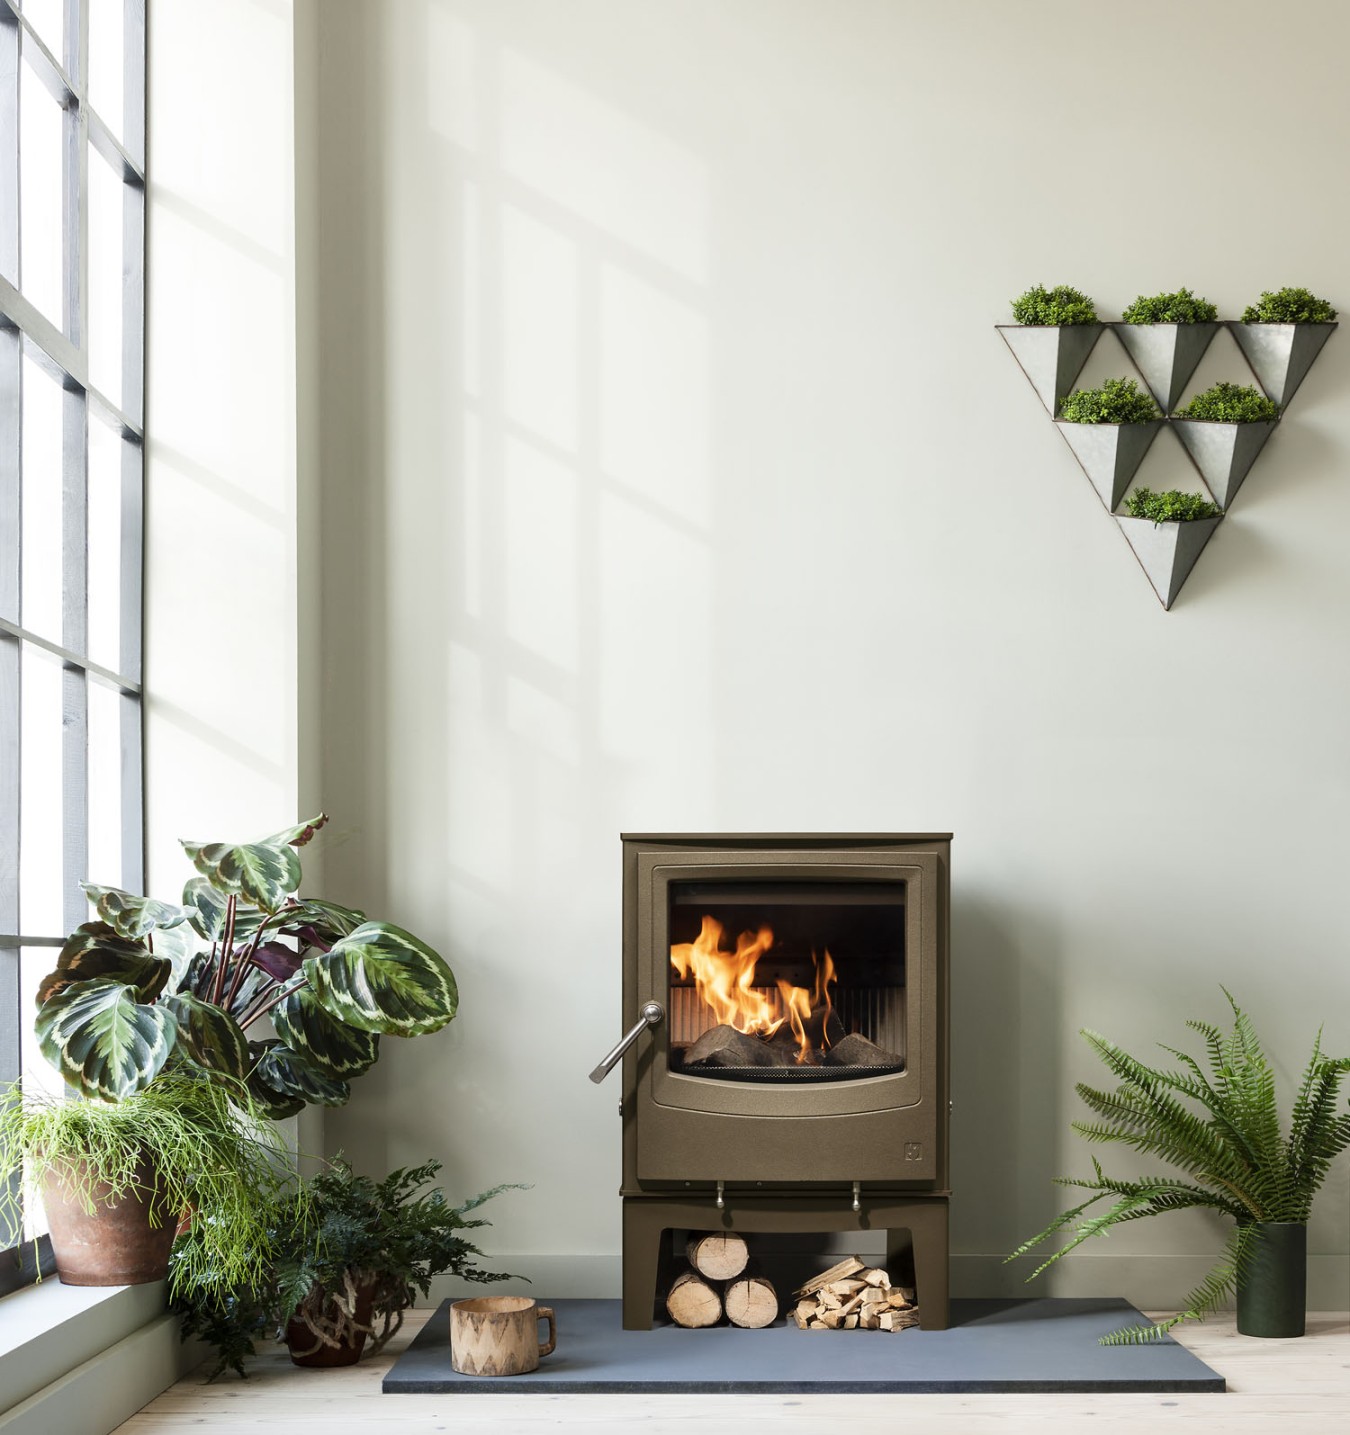 Choosing a wood burning stove for our living room - Design Hunter